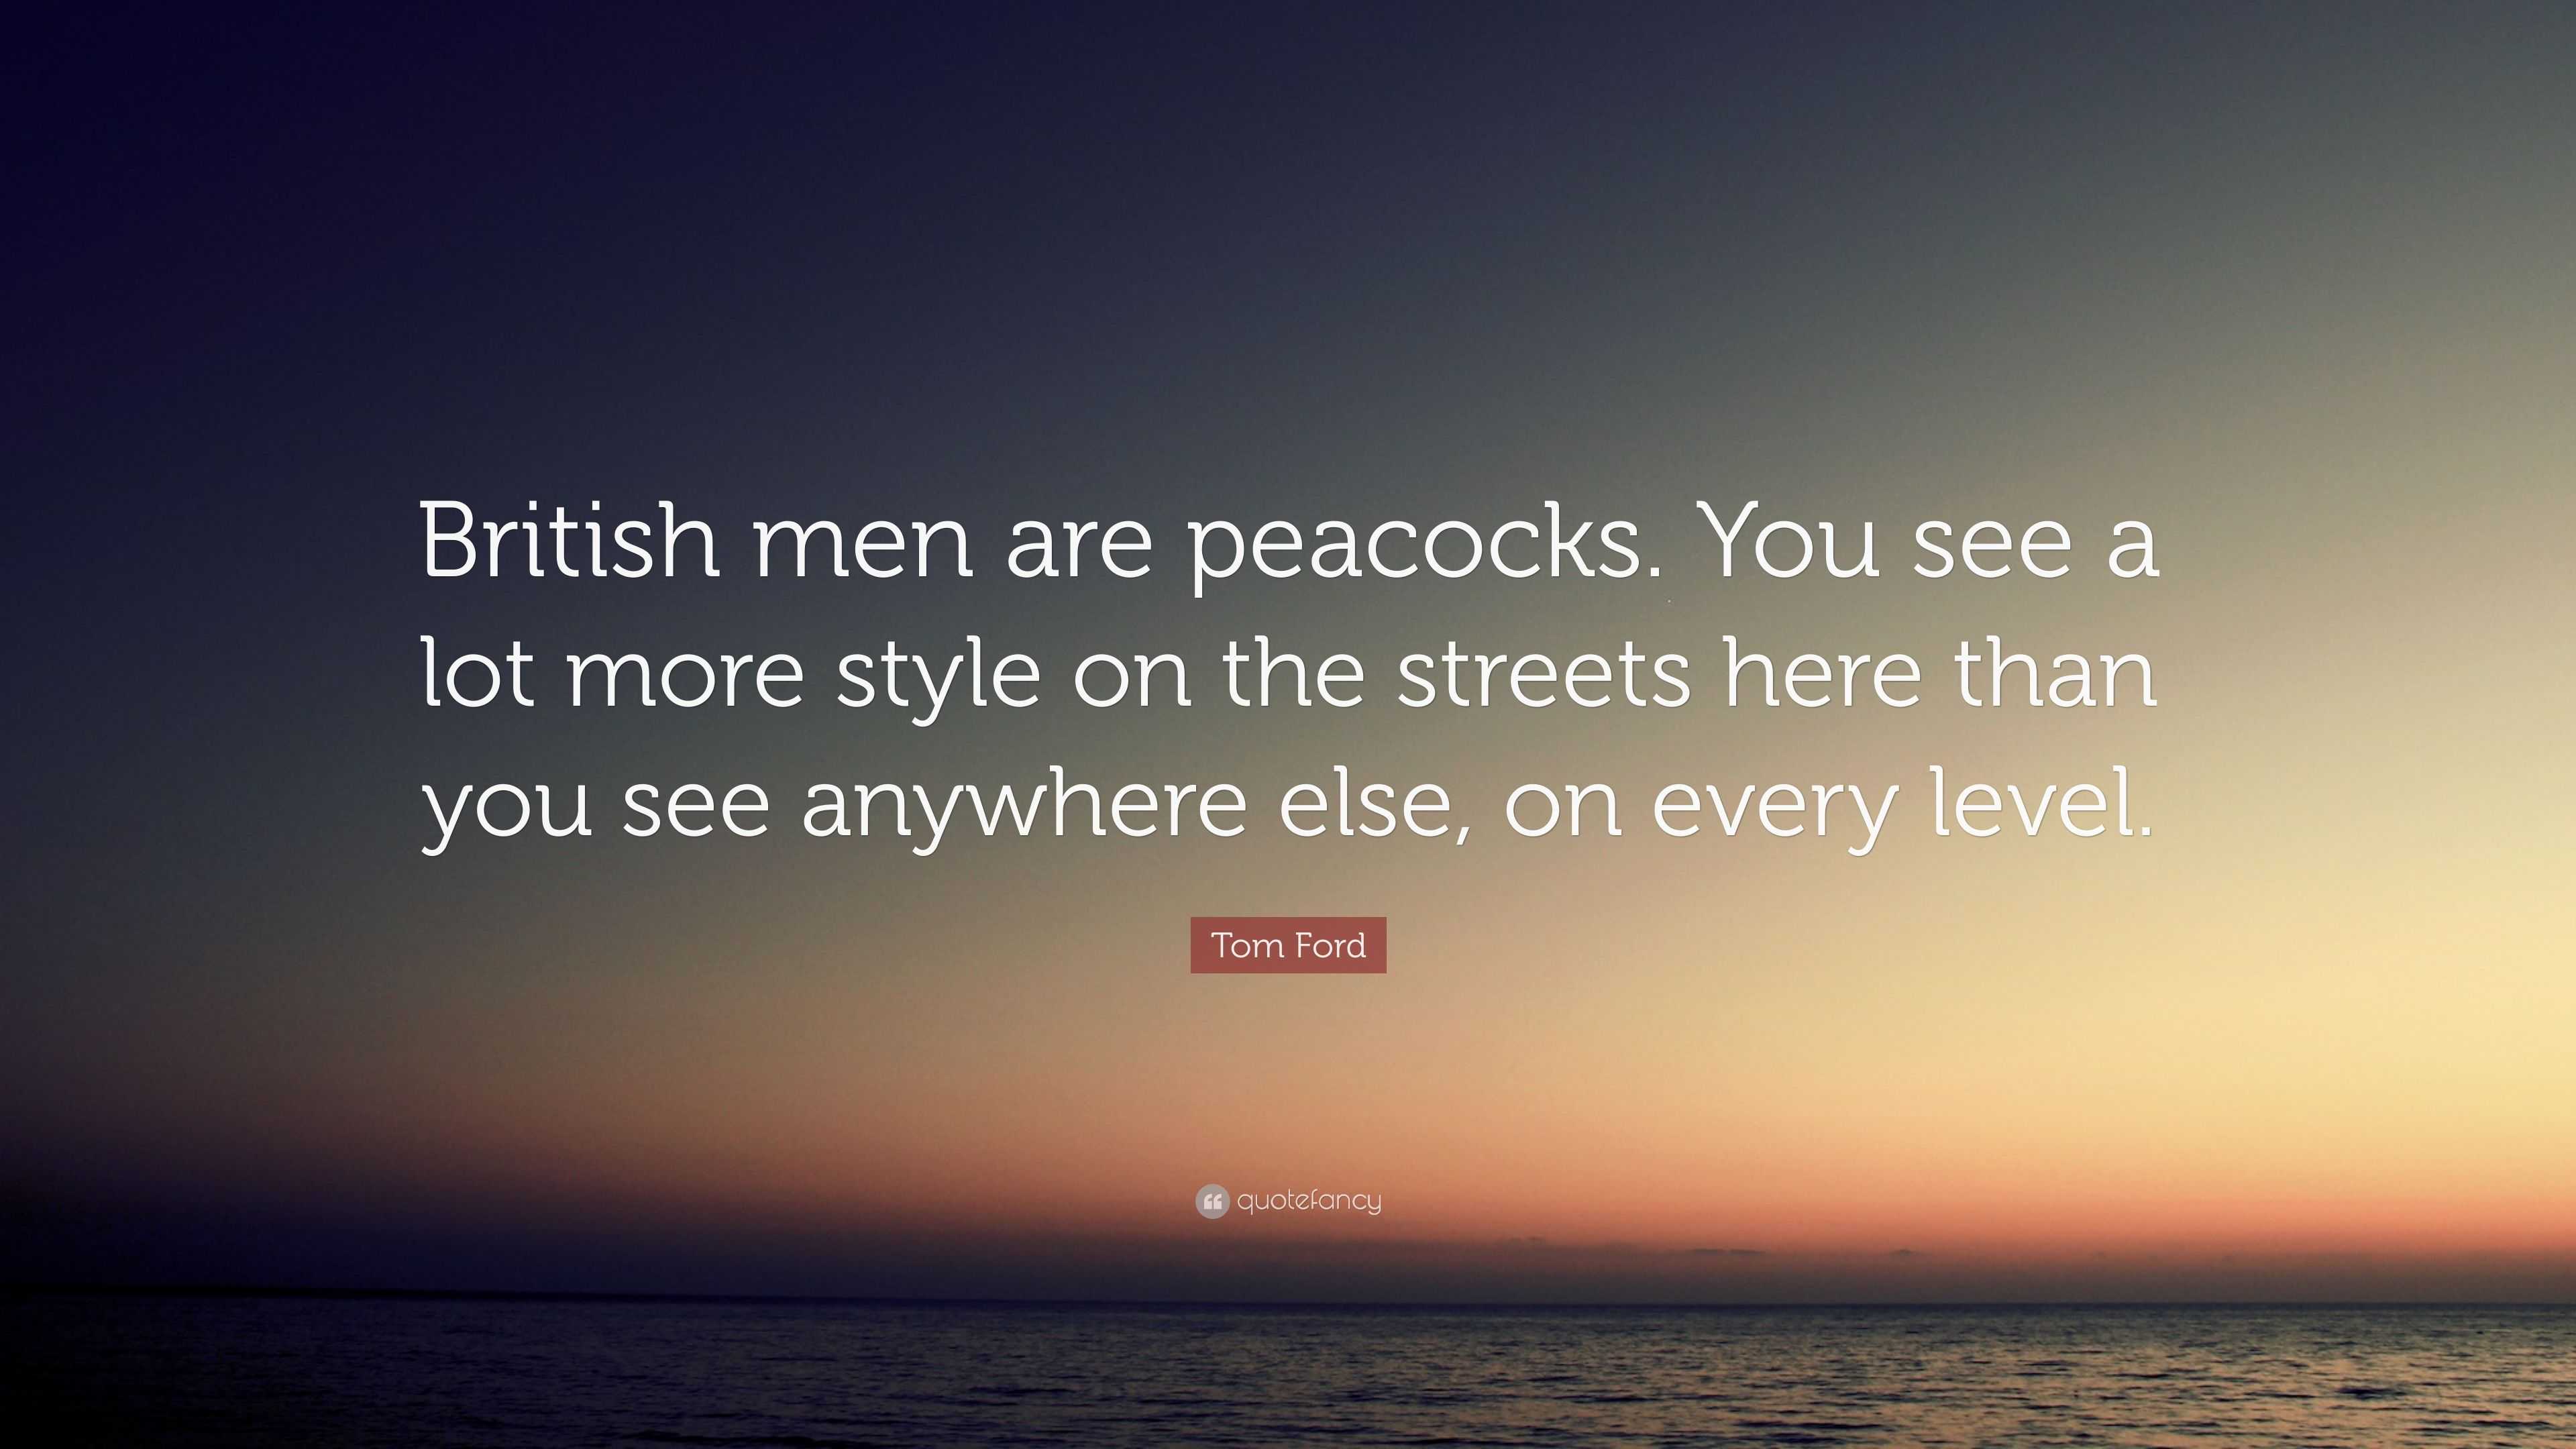 Tom Ford Quote: “British men are peacocks. You see a lot more style on the  streets